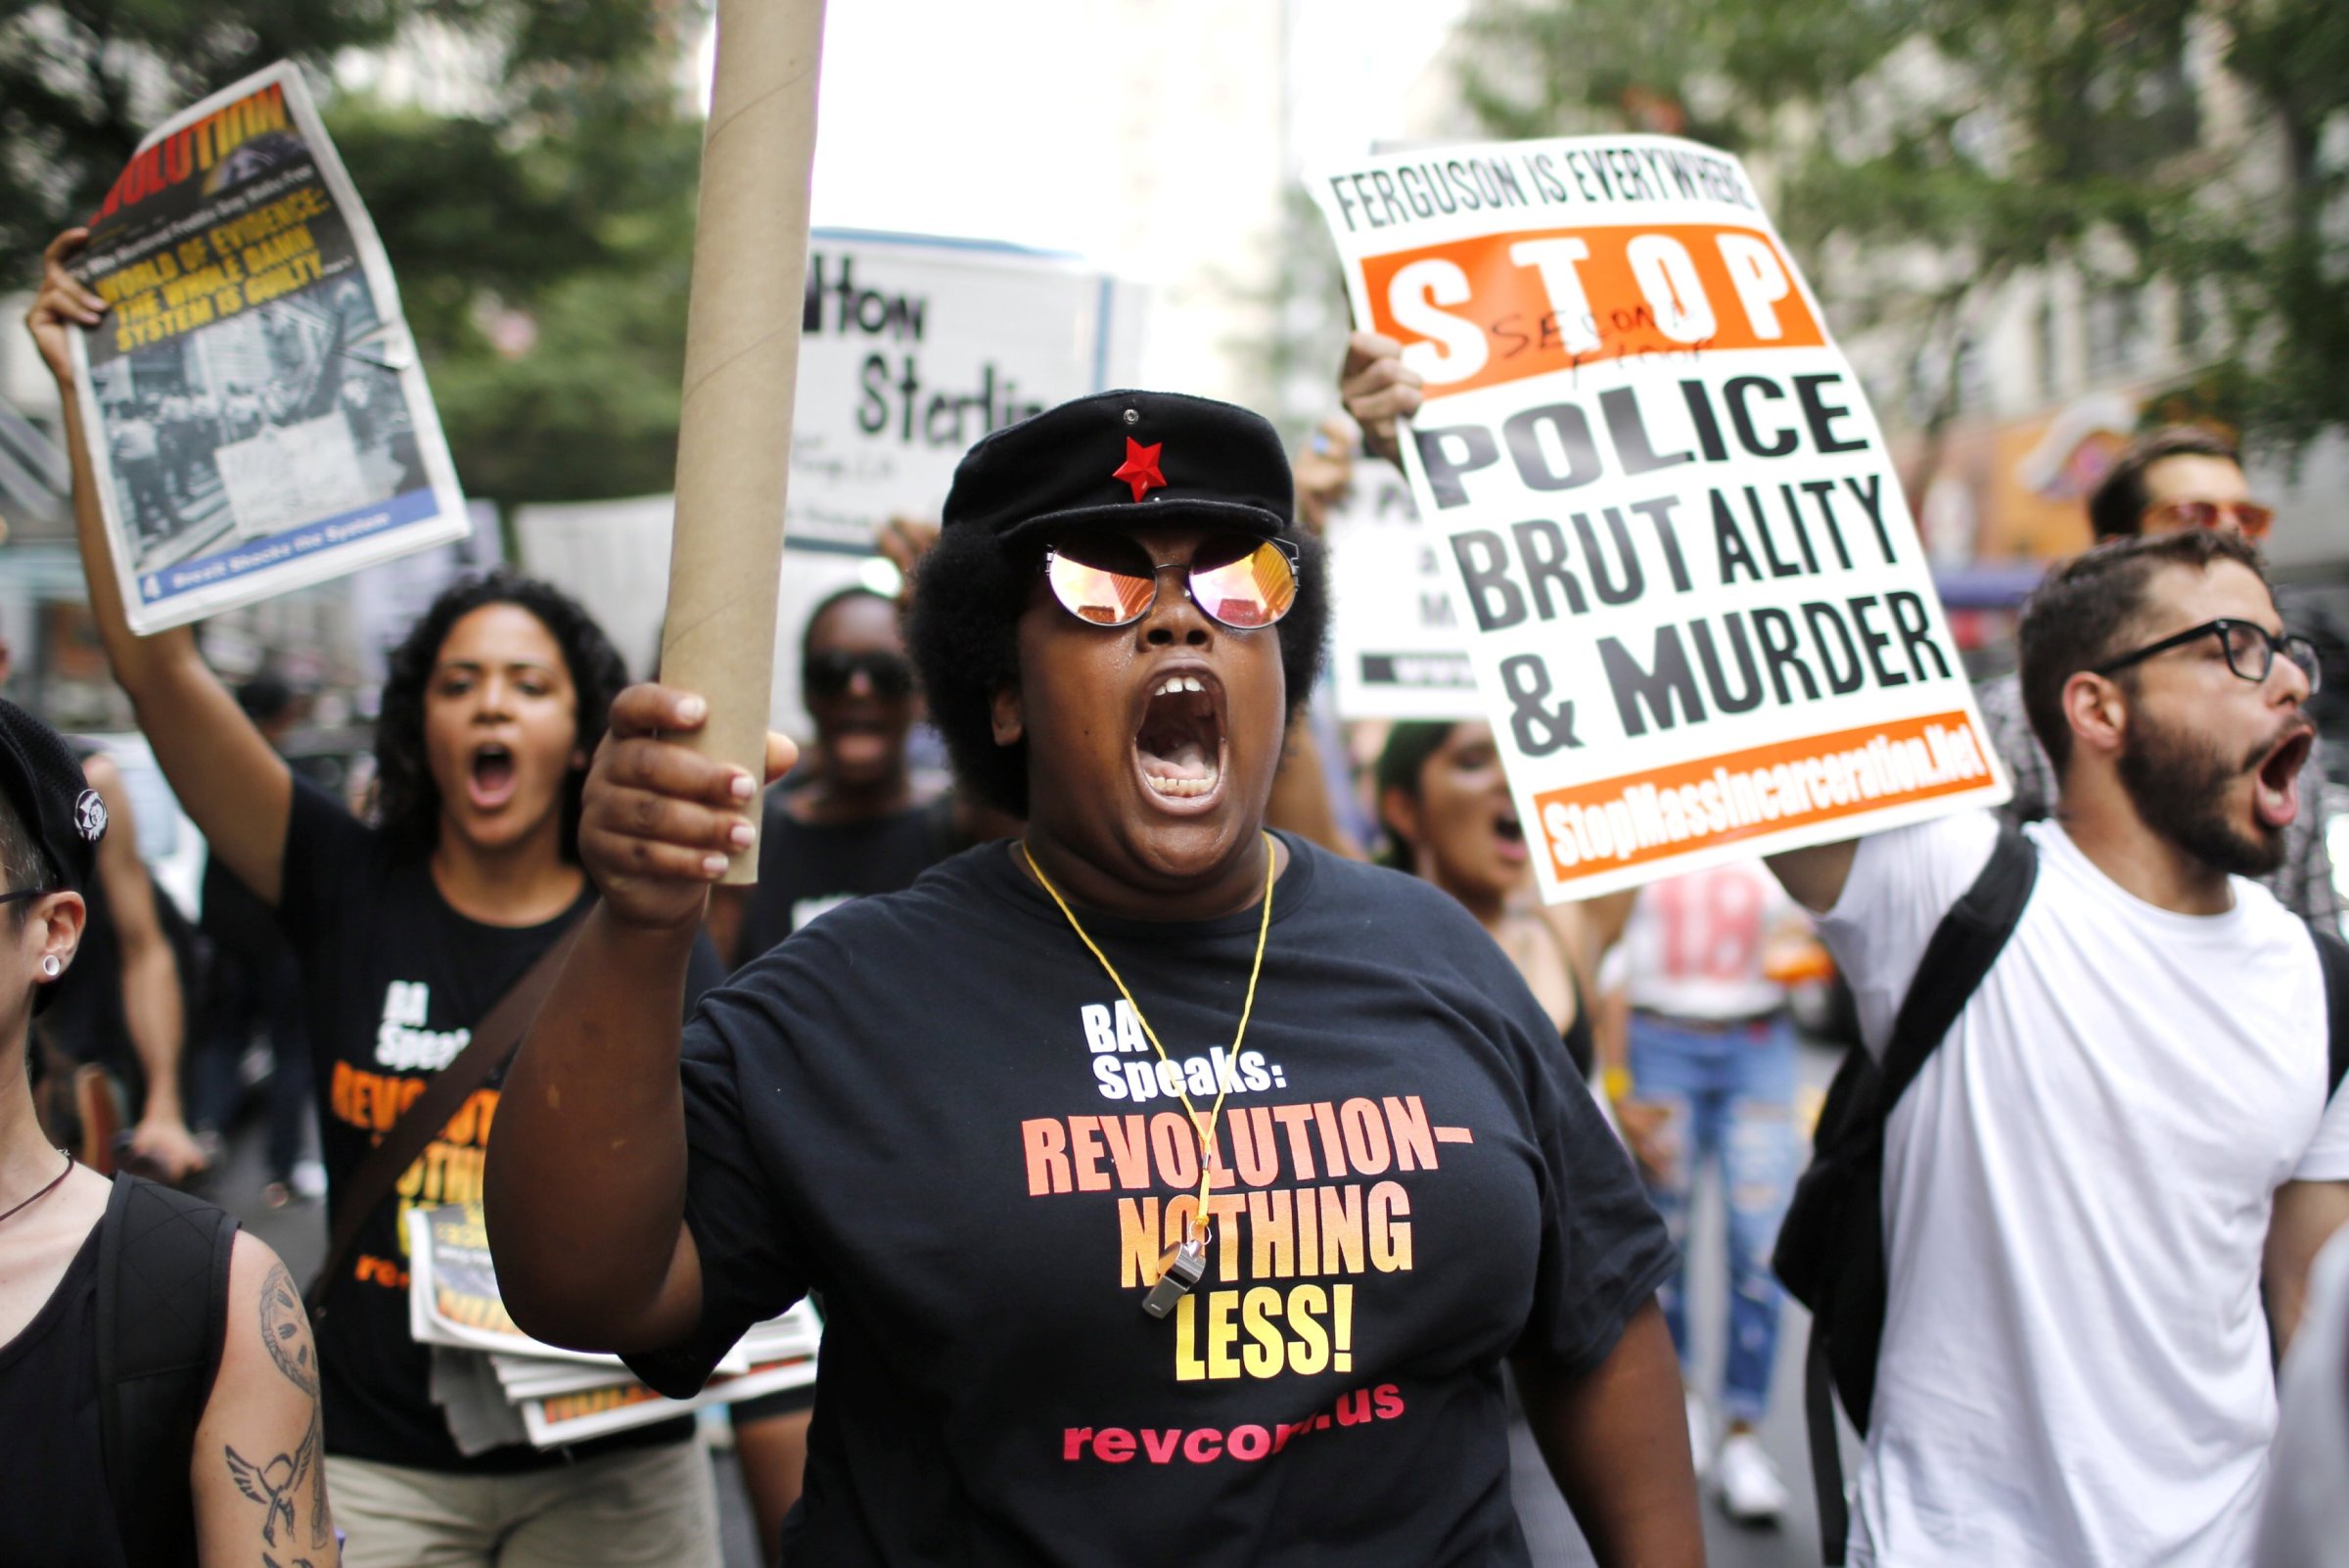 People take part in a protest for the killing of Alton Sterling and Philando Castile during a march along Manhattan's streets in New York